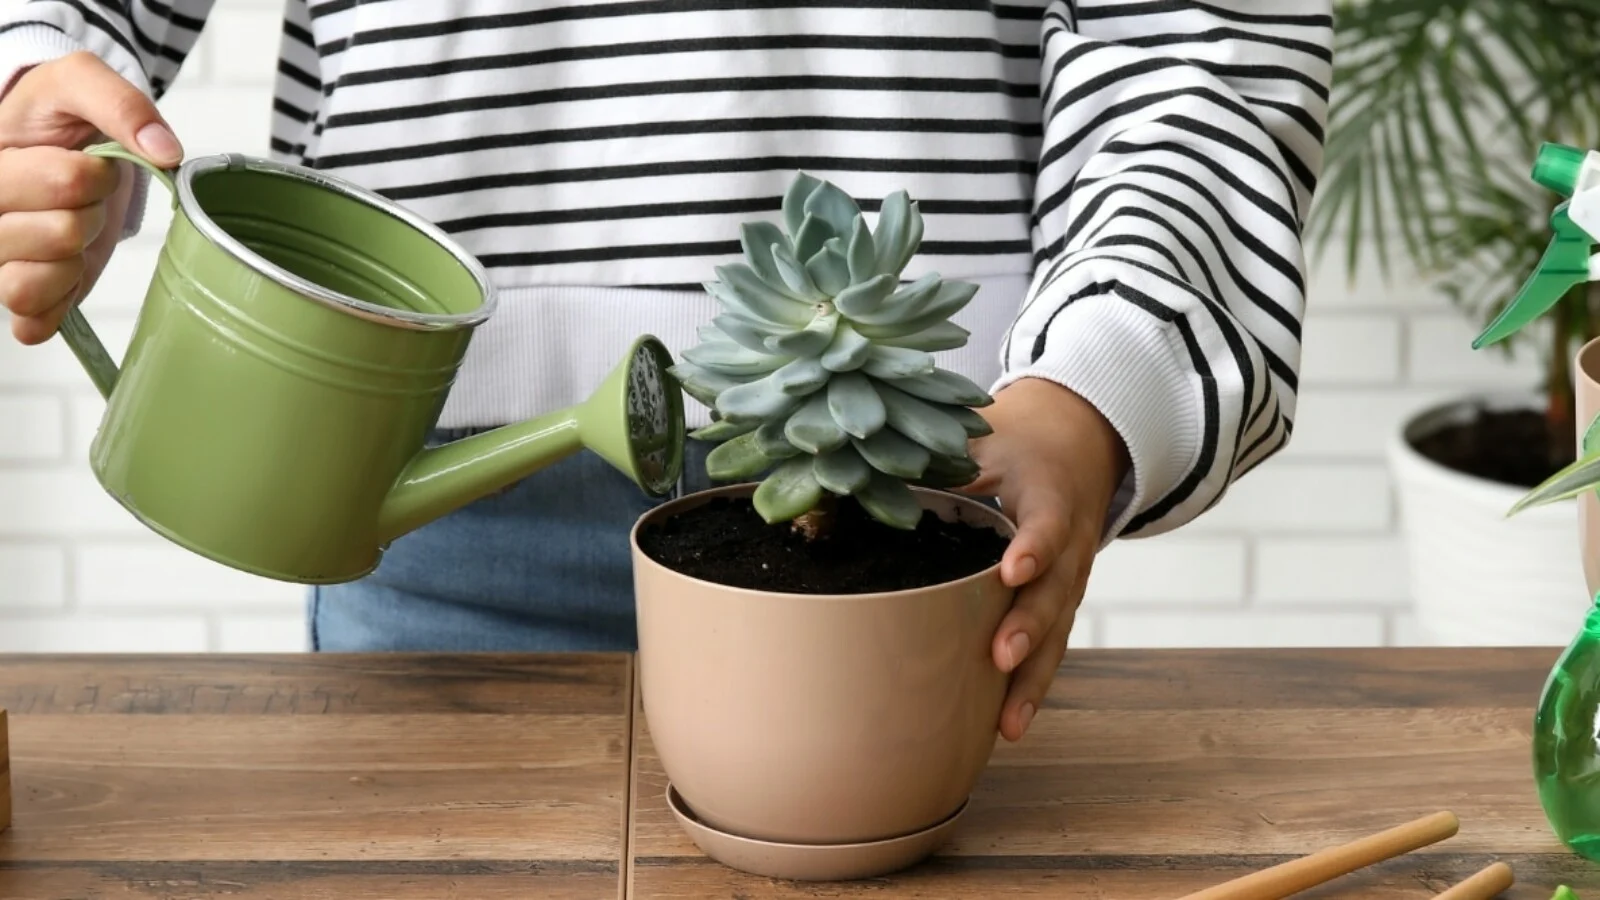 Person caring for echeveria agavoides plant in pot.